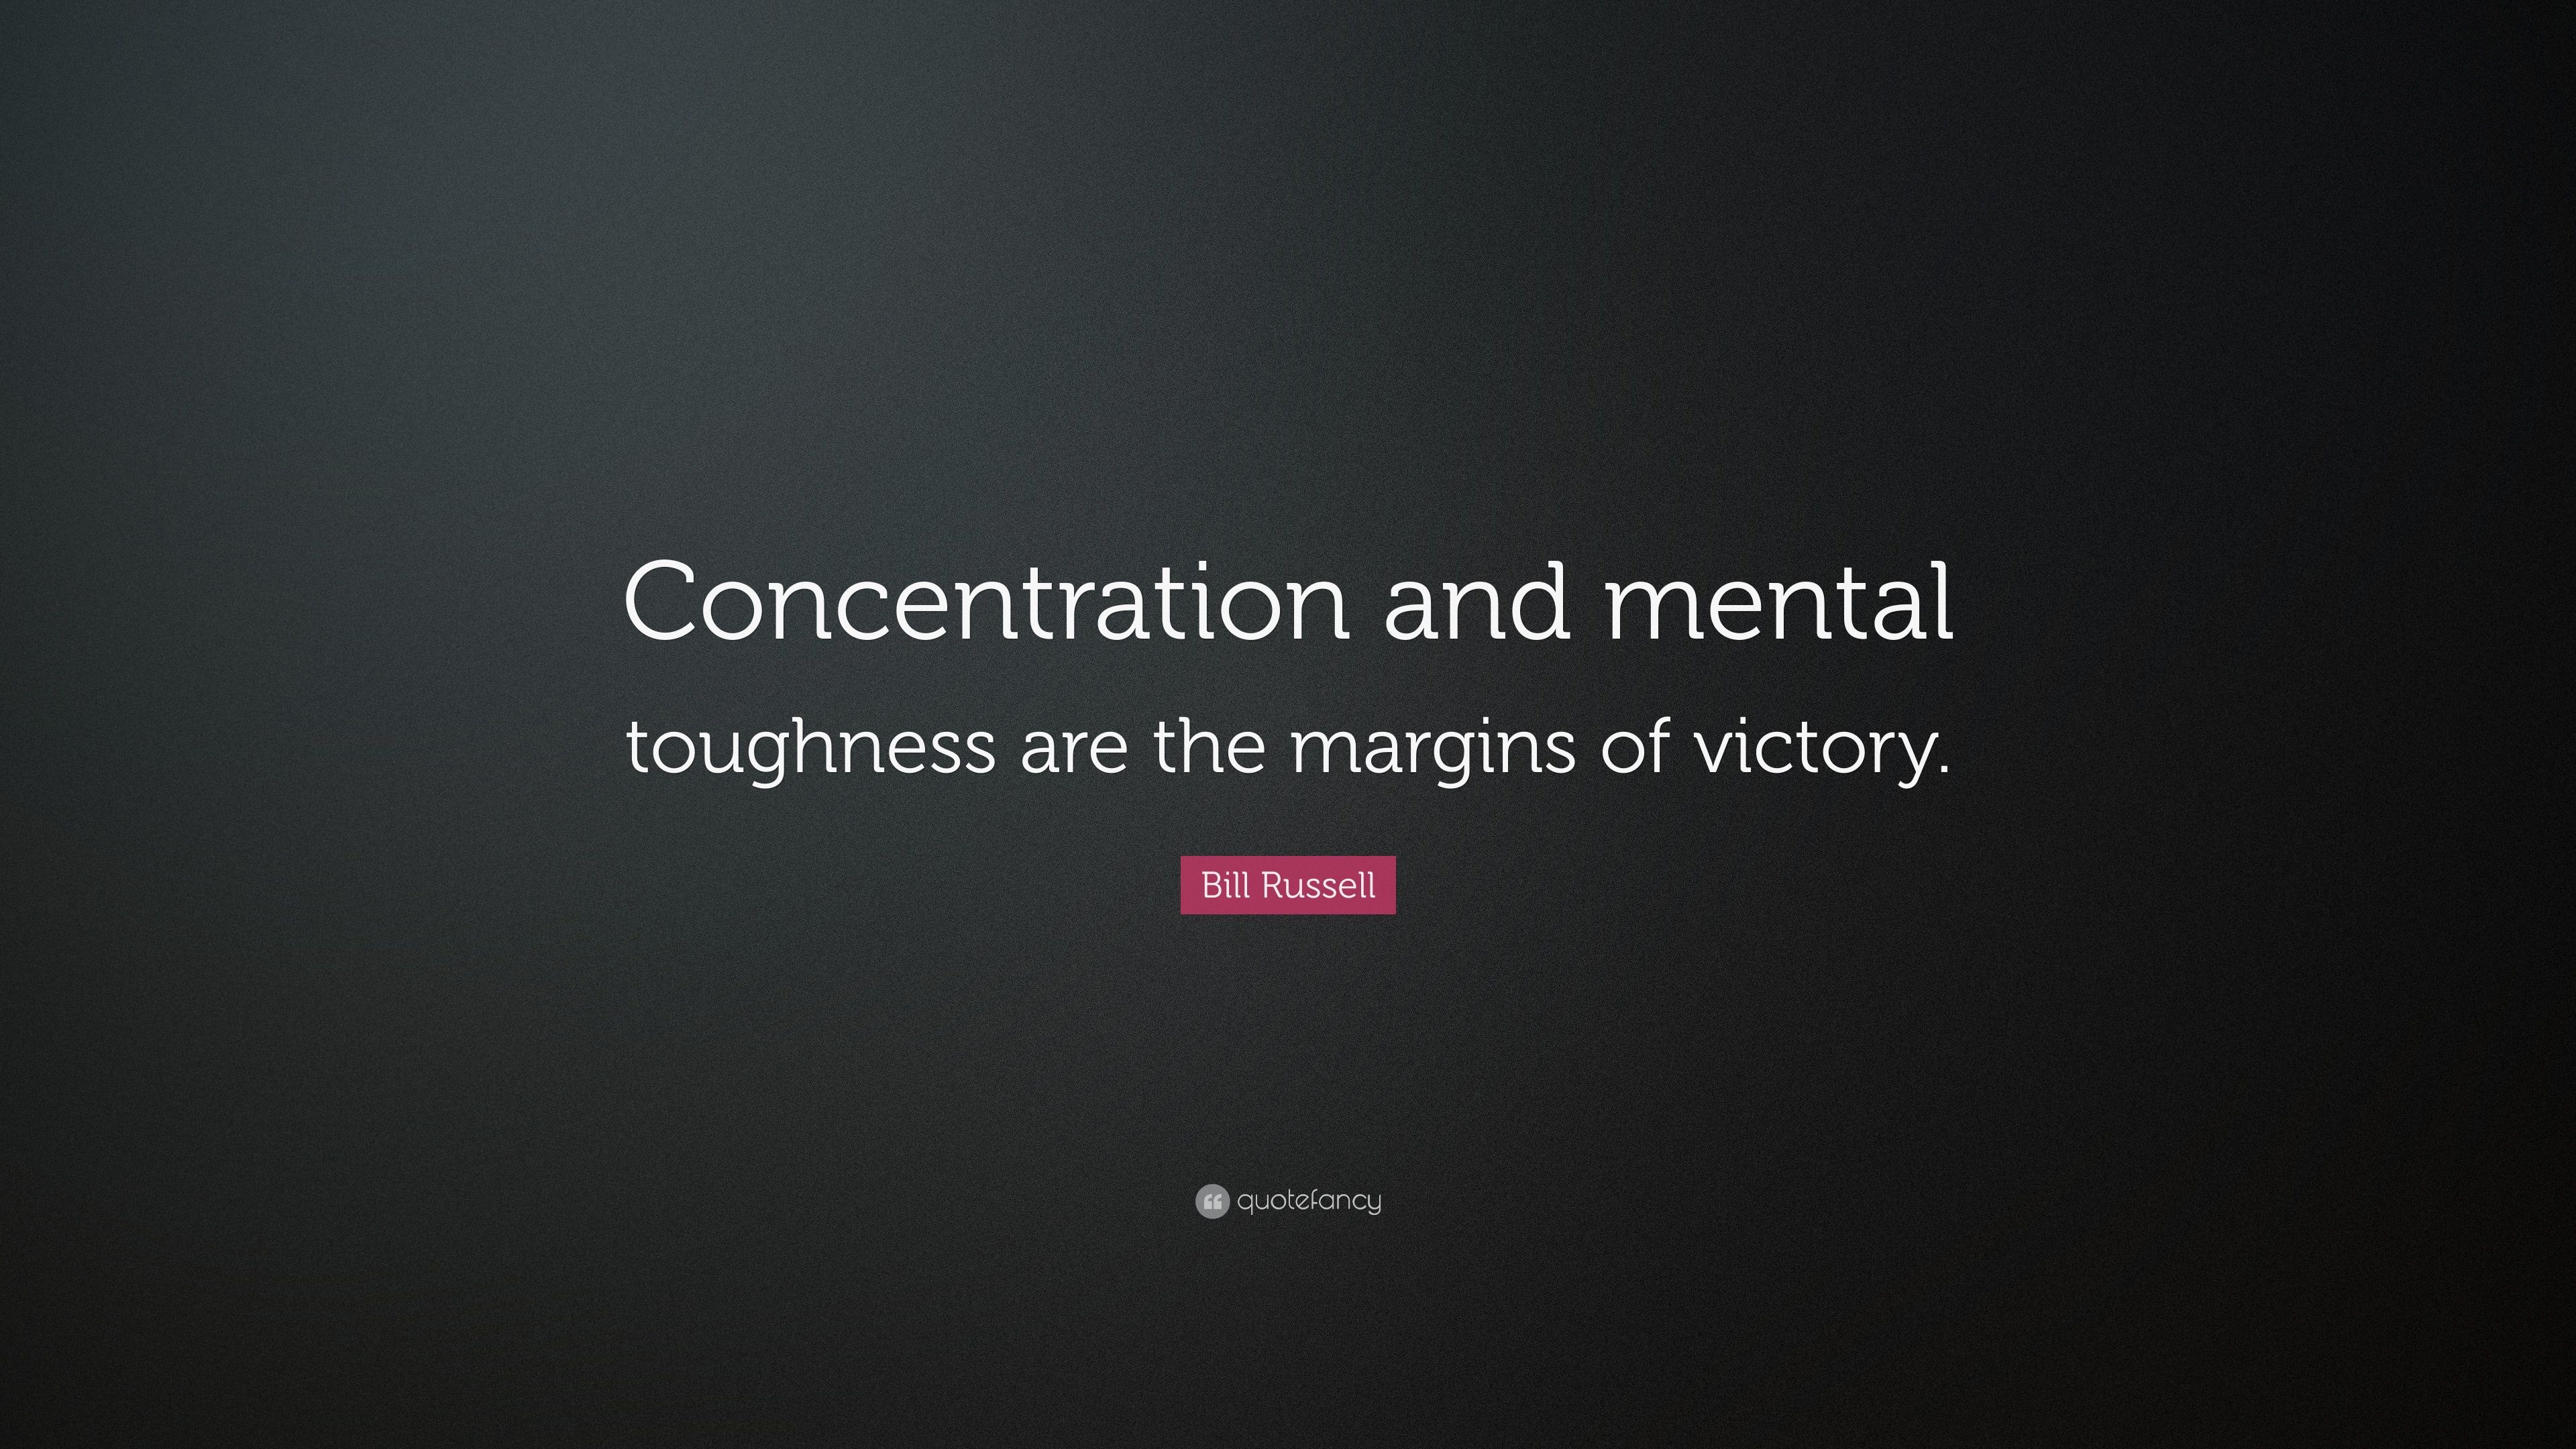 Bill Russell Quote: “Concentration and mental toughness are